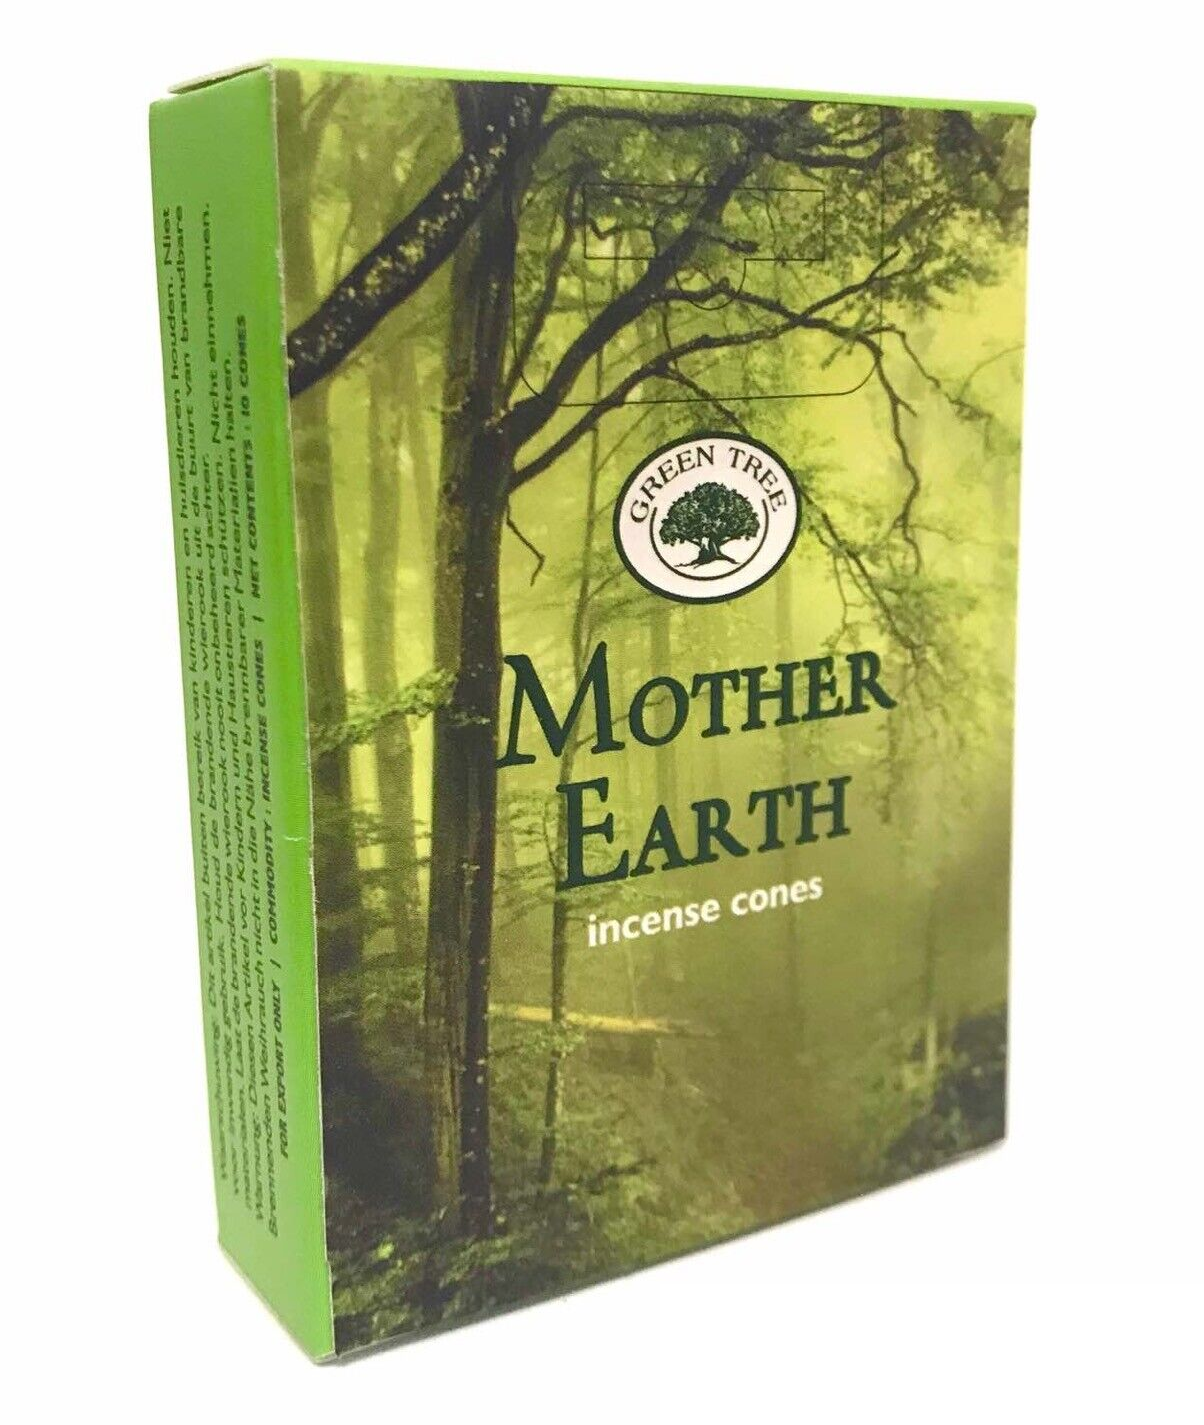 120x Green Tree Mother Earth Incense Cones